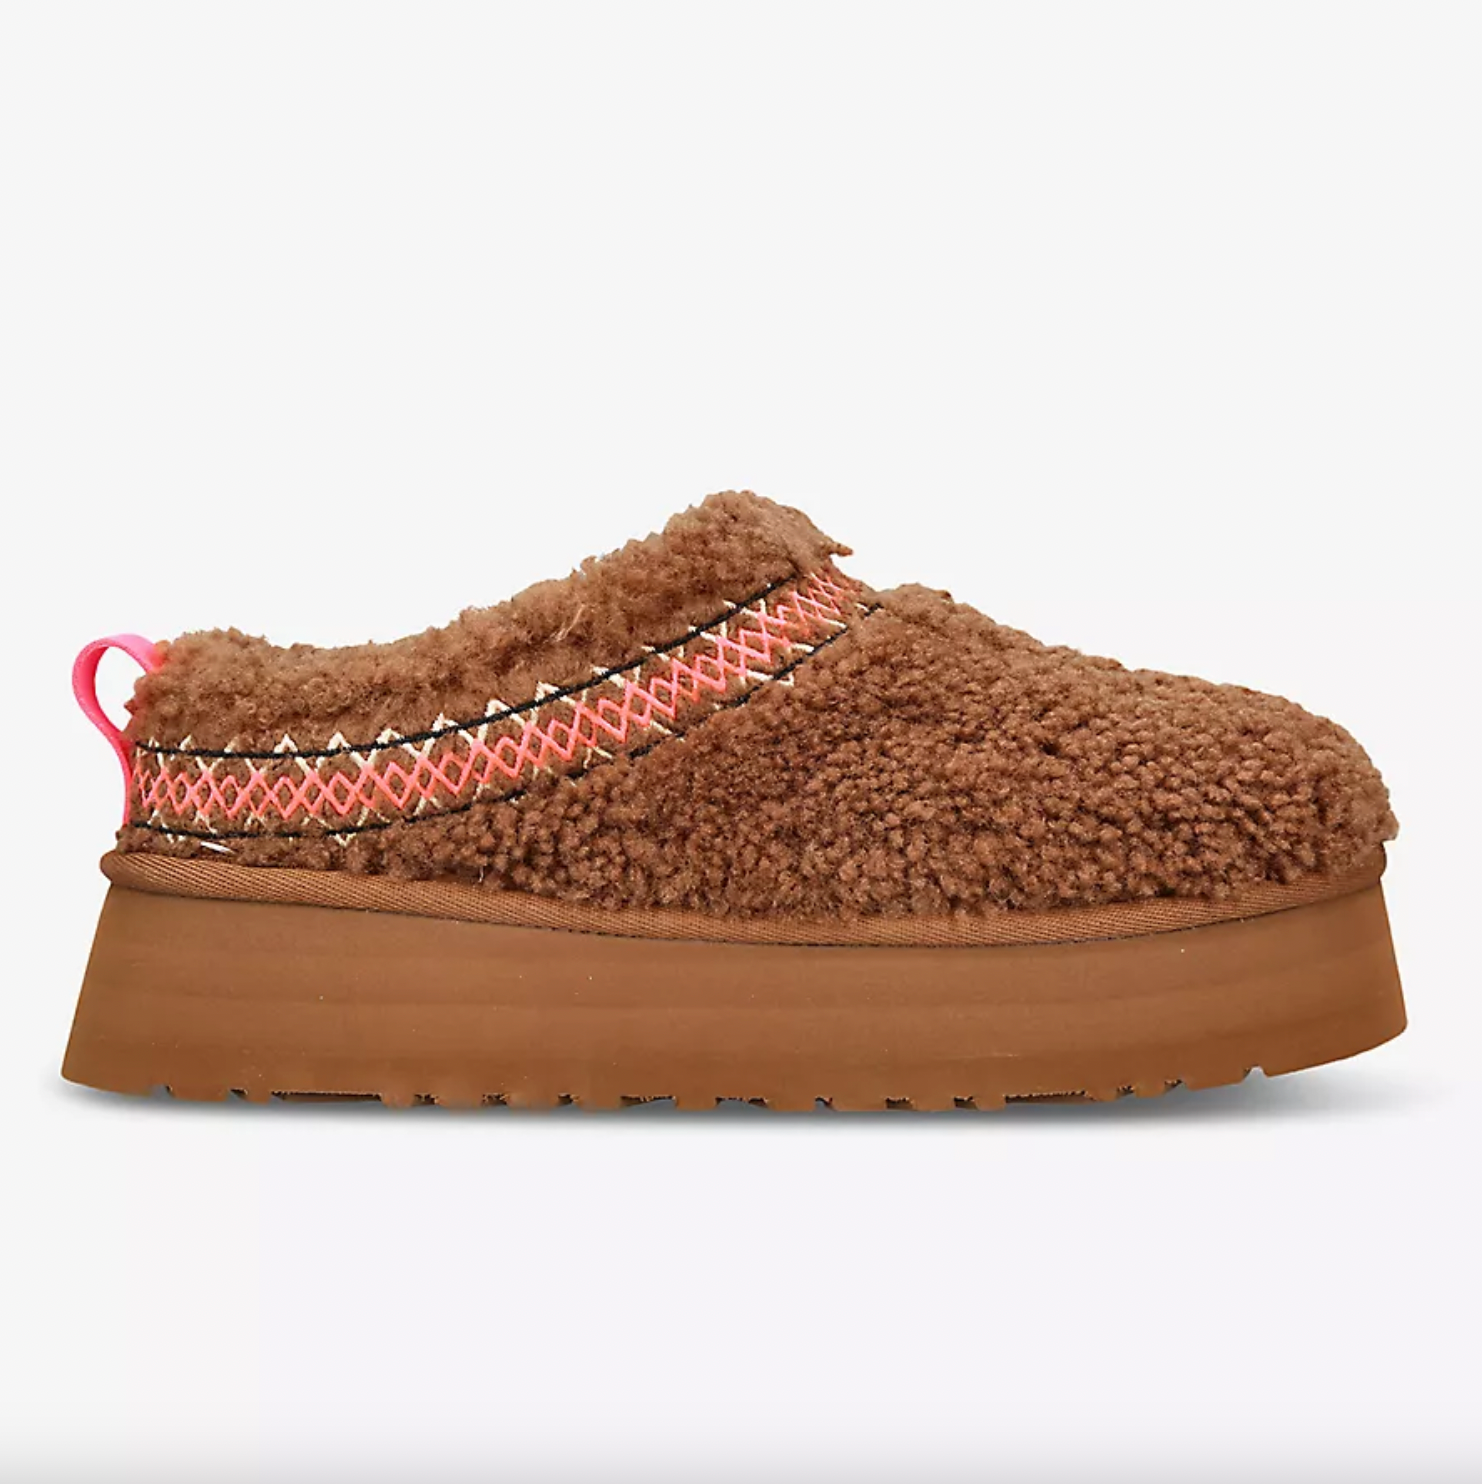 Brown Tazz shearling-lined suede platform slippers, Ugg